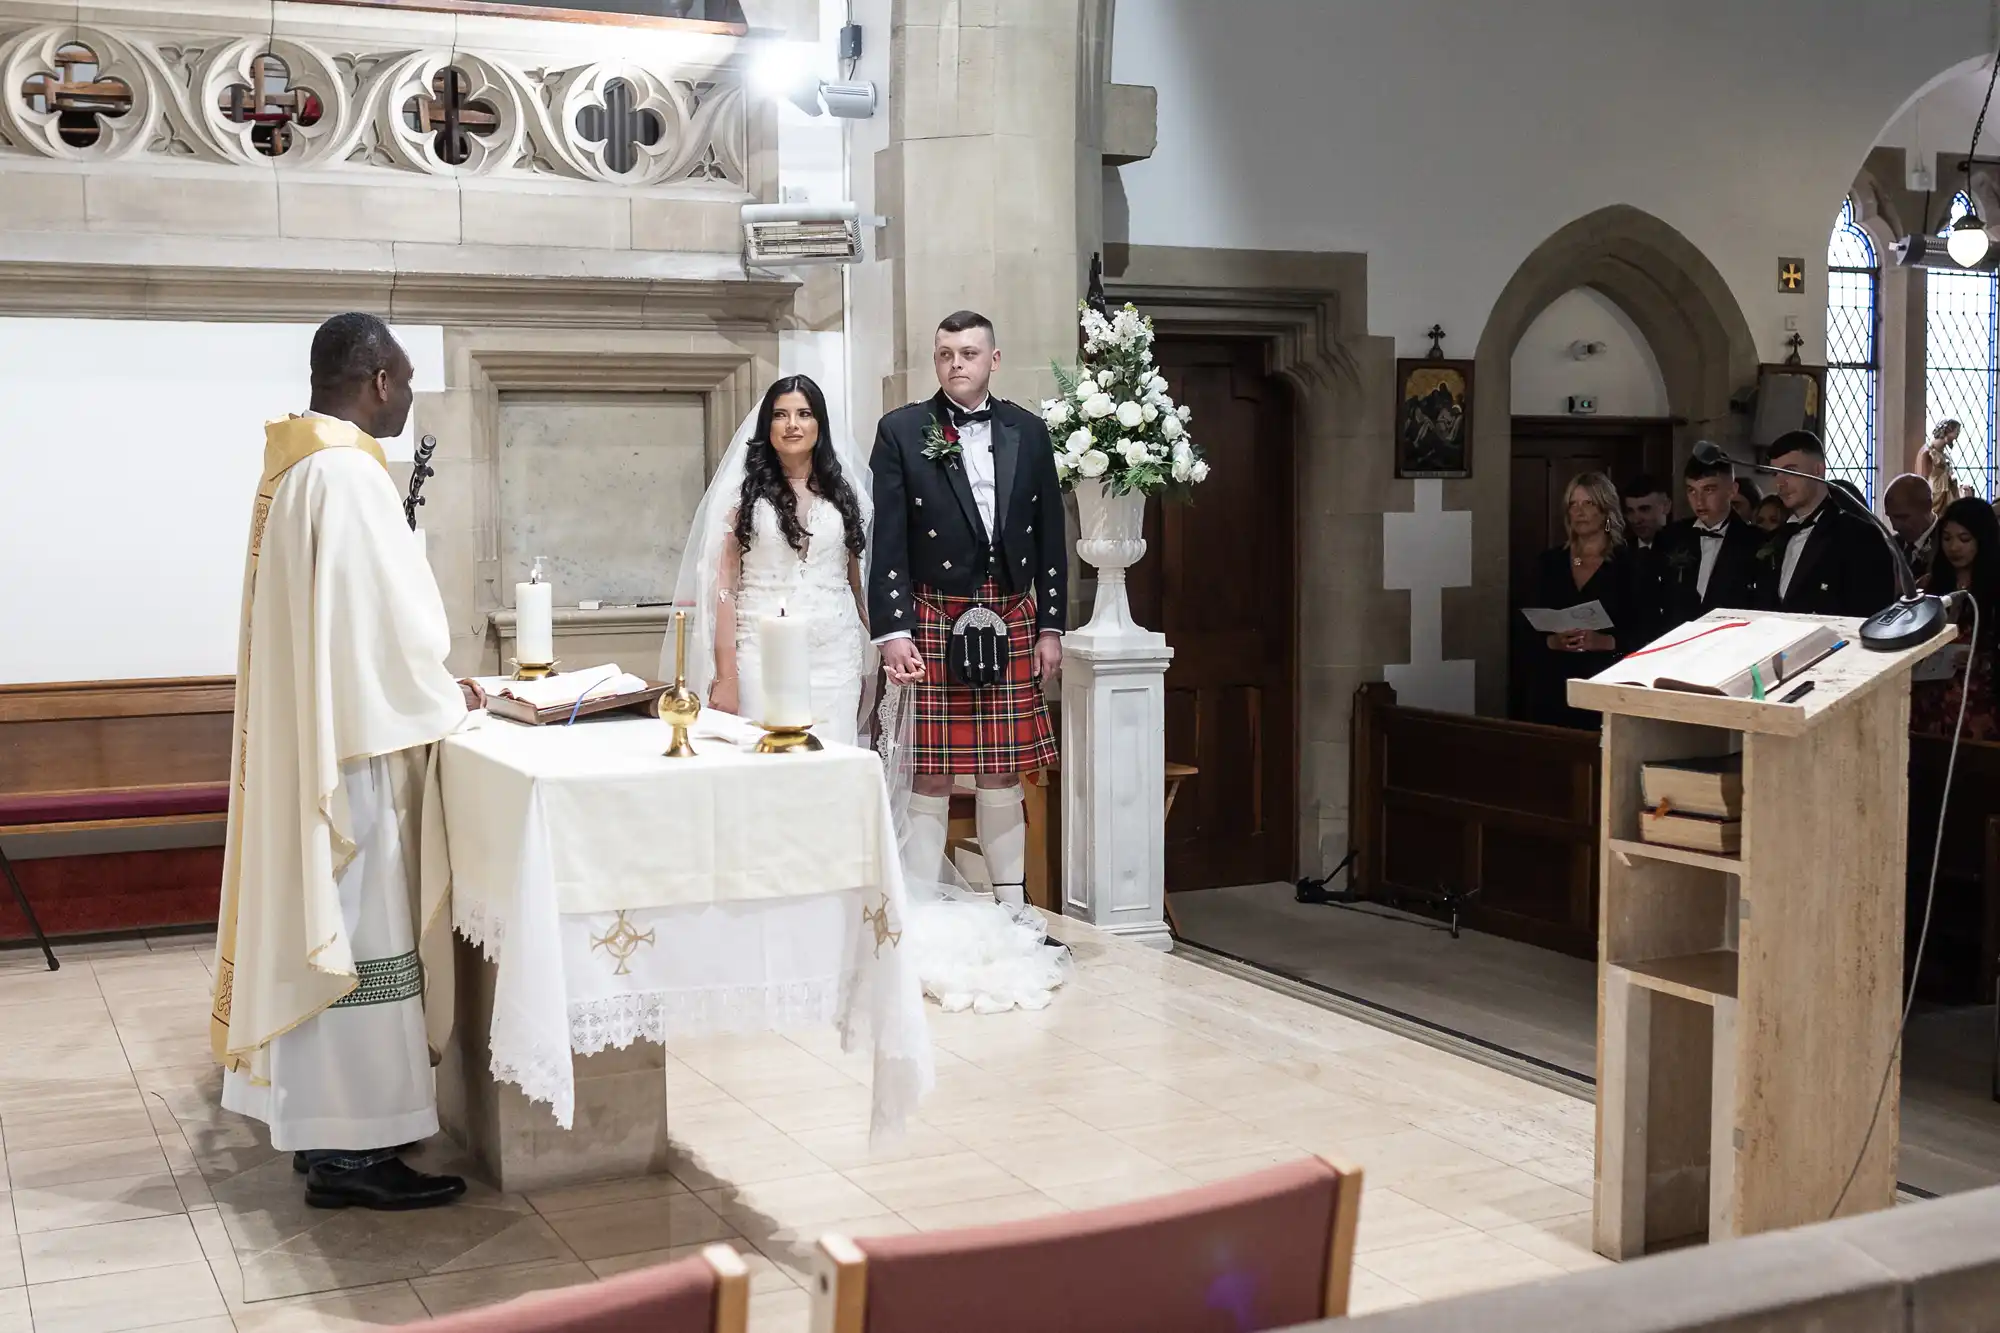 A bride and groom stand before a priest at a church altar during a wedding ceremony; the groom wears a kilt. Guests are seated in the background.